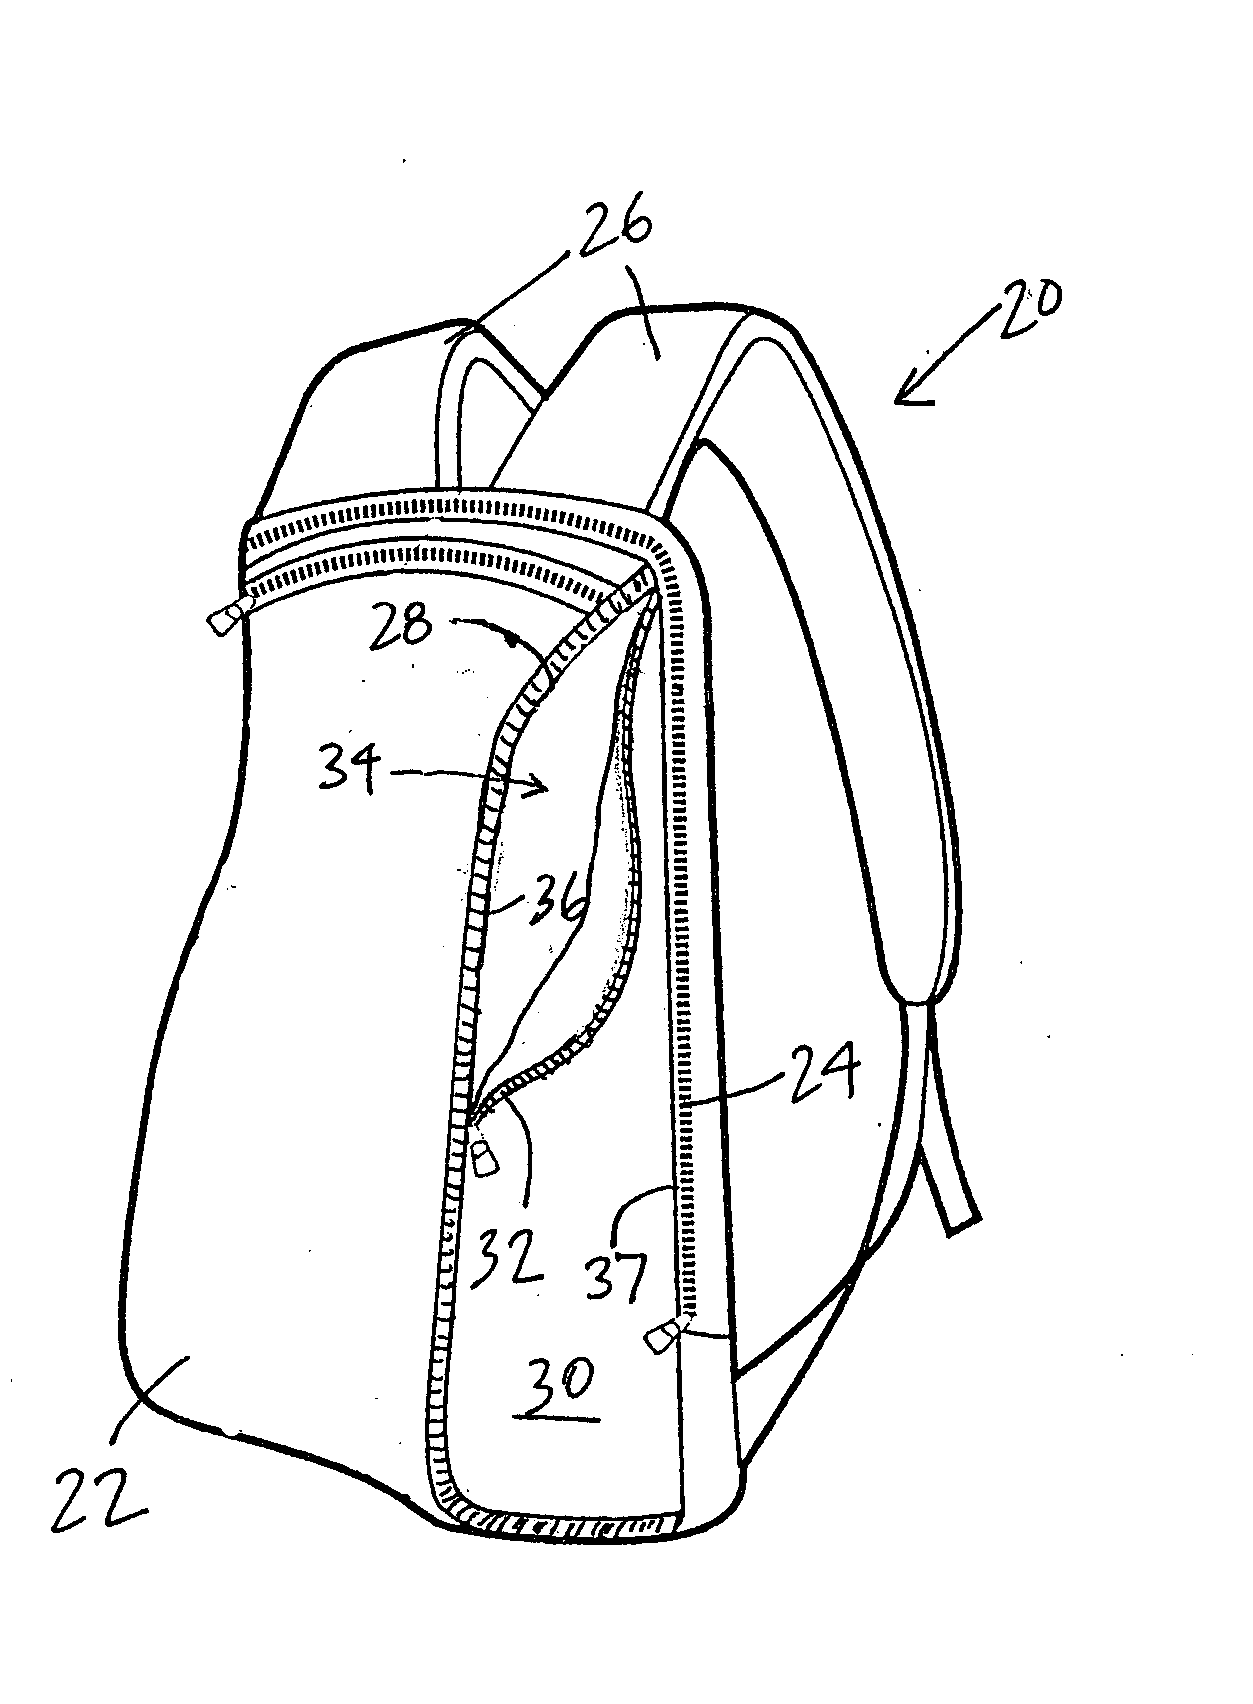 Reconfigurable bag for carrying items